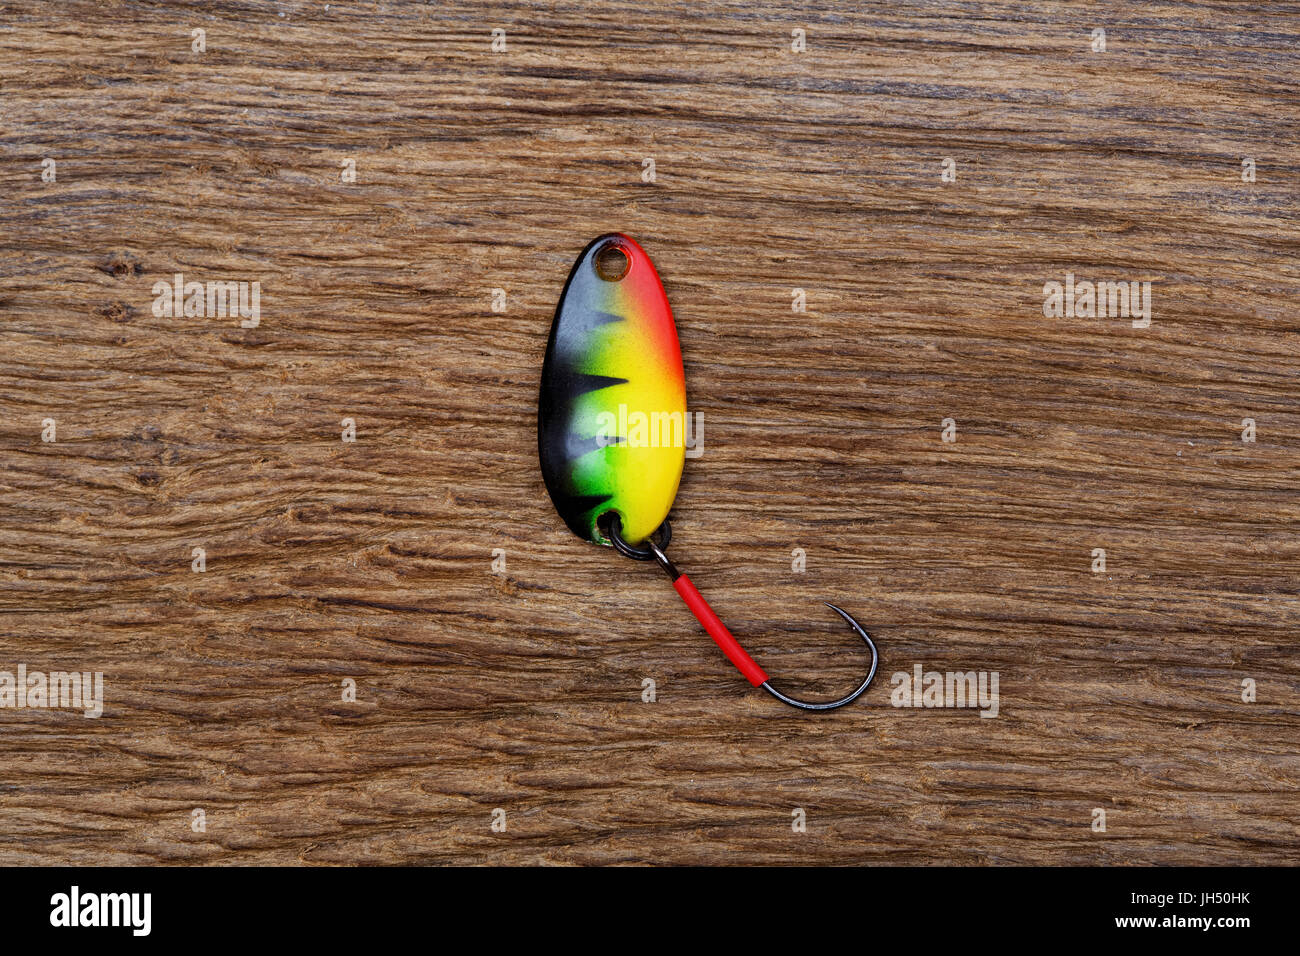 Fishing lure on the old wooden table. Stock Photo